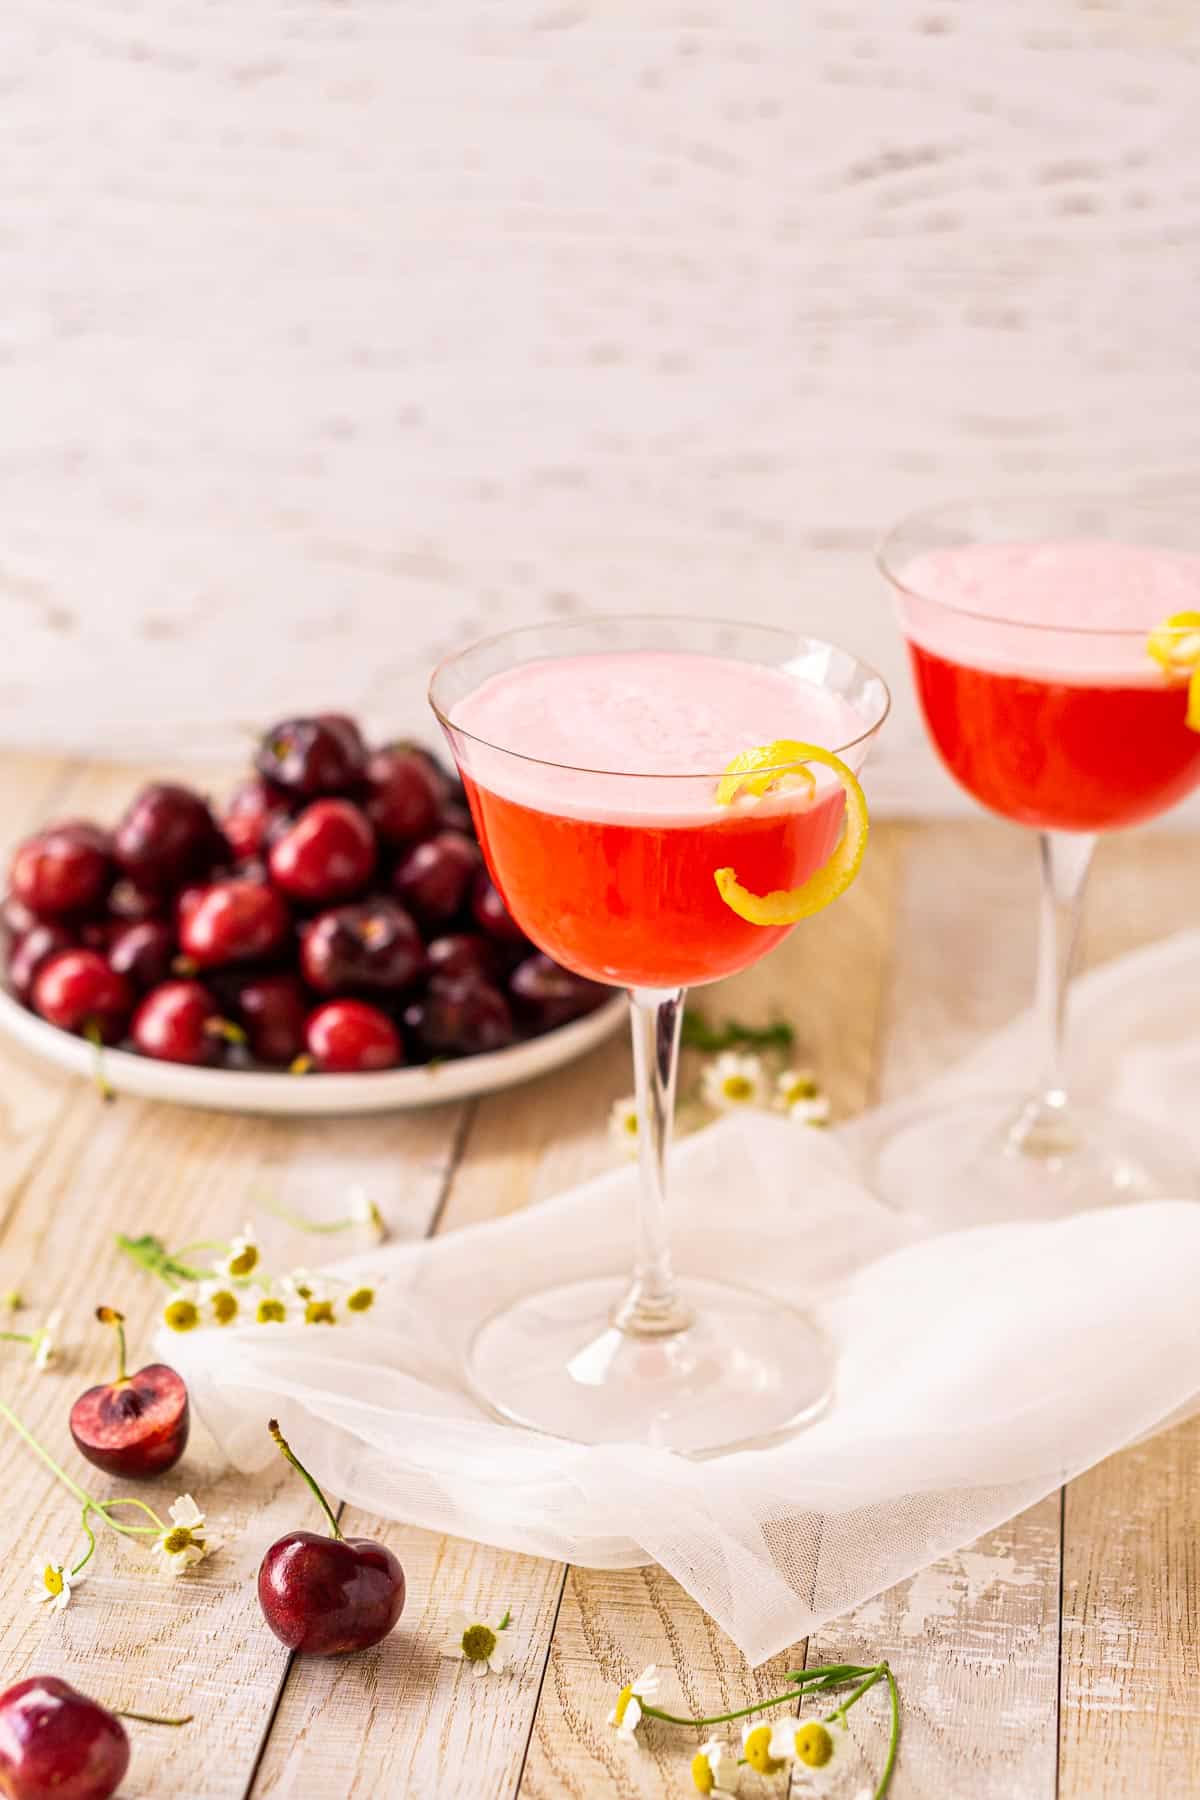 A side view of the cherry vodka sour on a lightly colored wooden board with cherries and flowers.